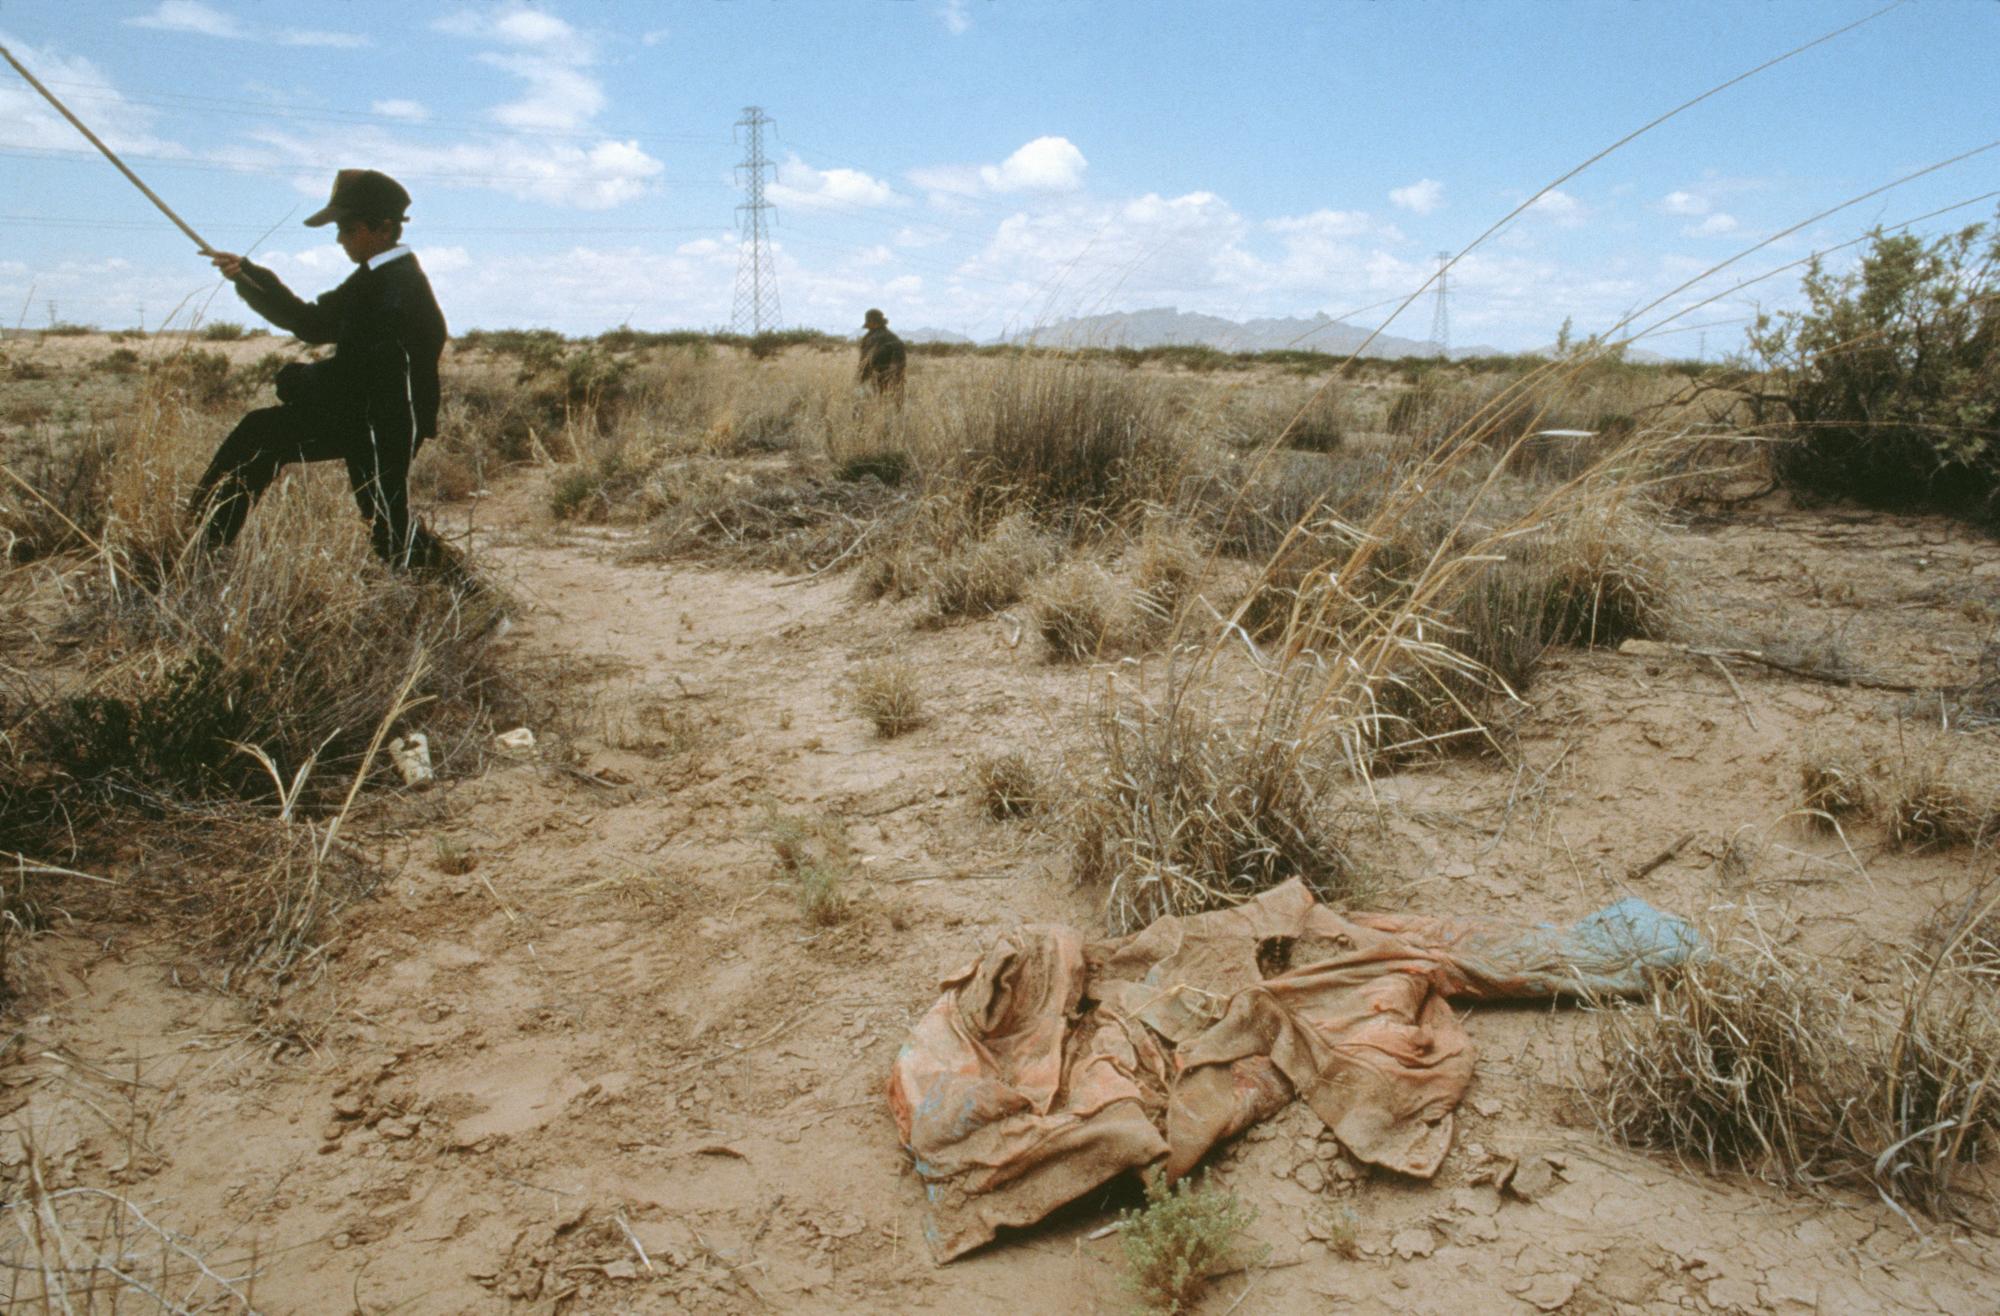 Missing Women of Juarez (1998) Search - Volunteers search the Lote Bravo for remains of missing...